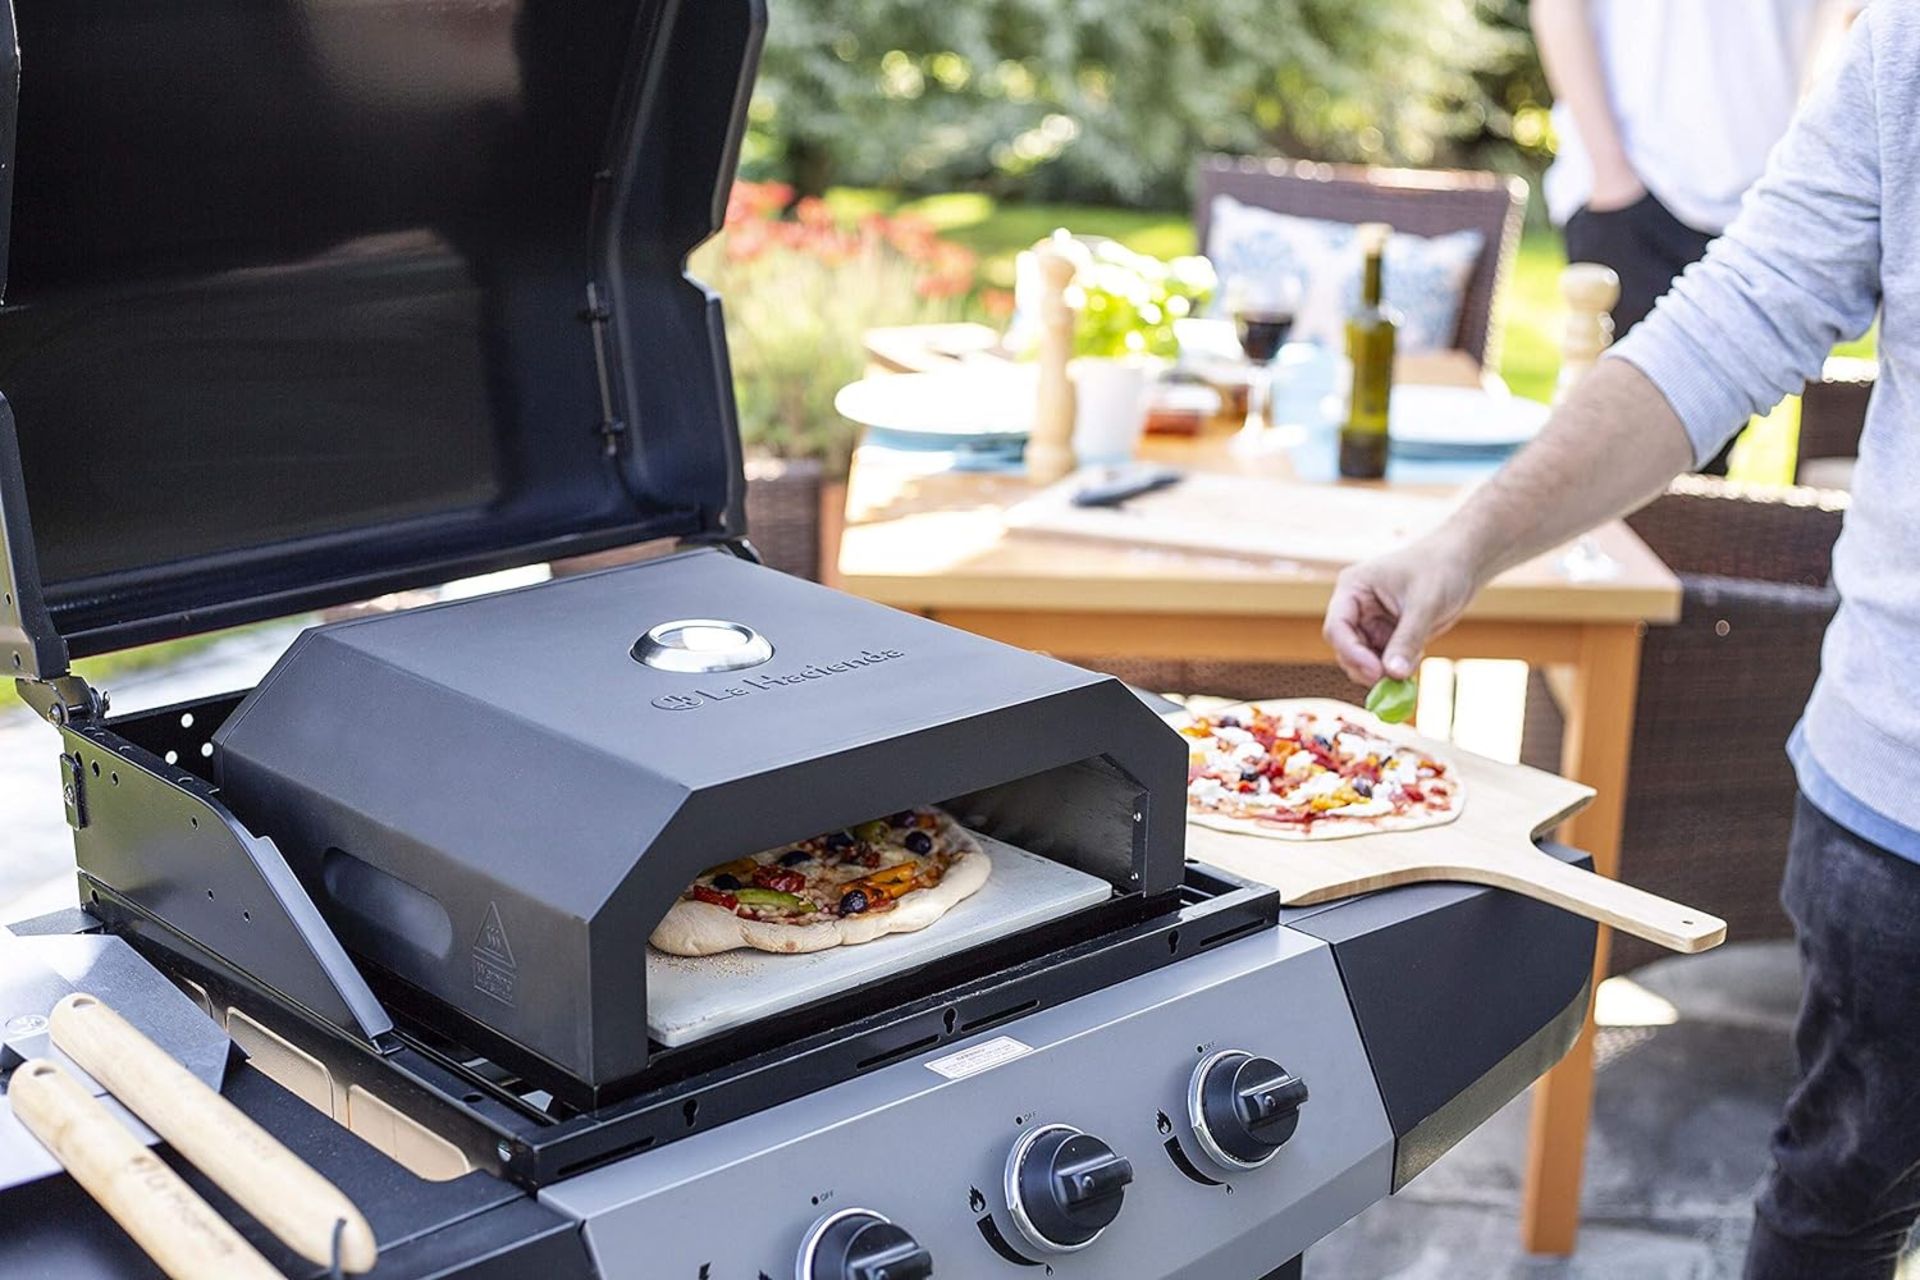 BRAND NEW LA HACIENDA Pizza Oven for Barbecues. RRP £99.99 EACH. The revolutionary BBQ Pizza Oven is - Image 2 of 3